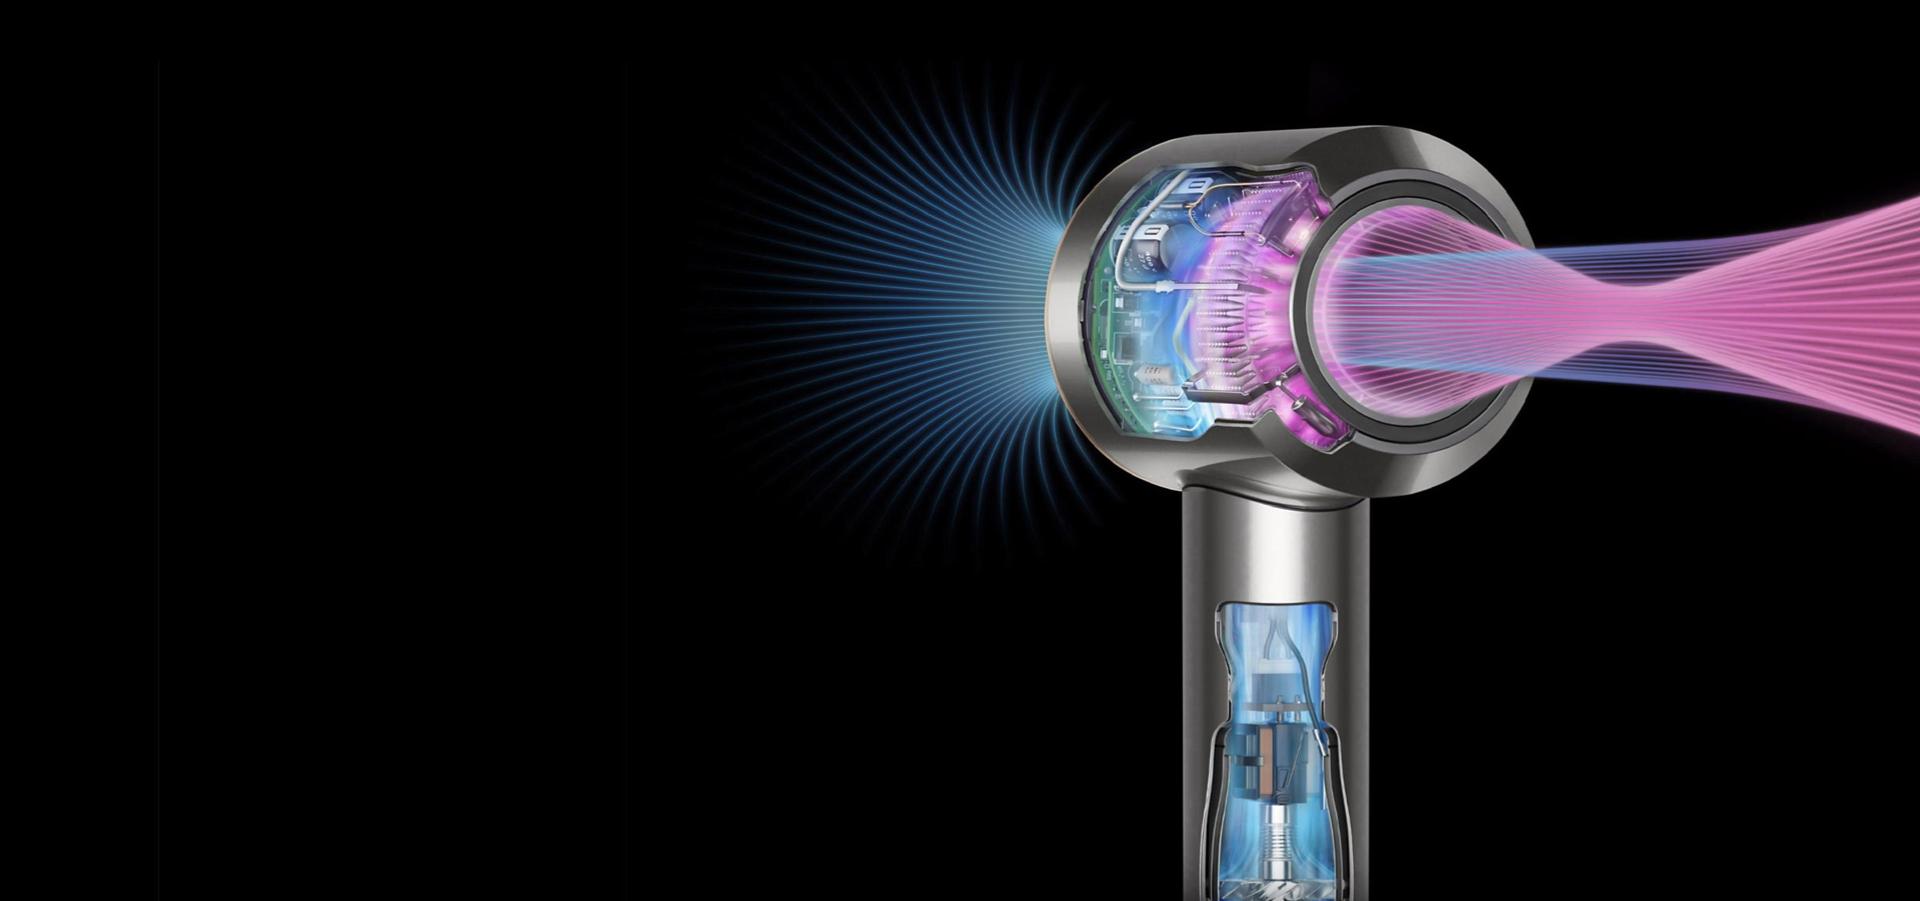 Technology within a Dyson Supersonic hair dryer.